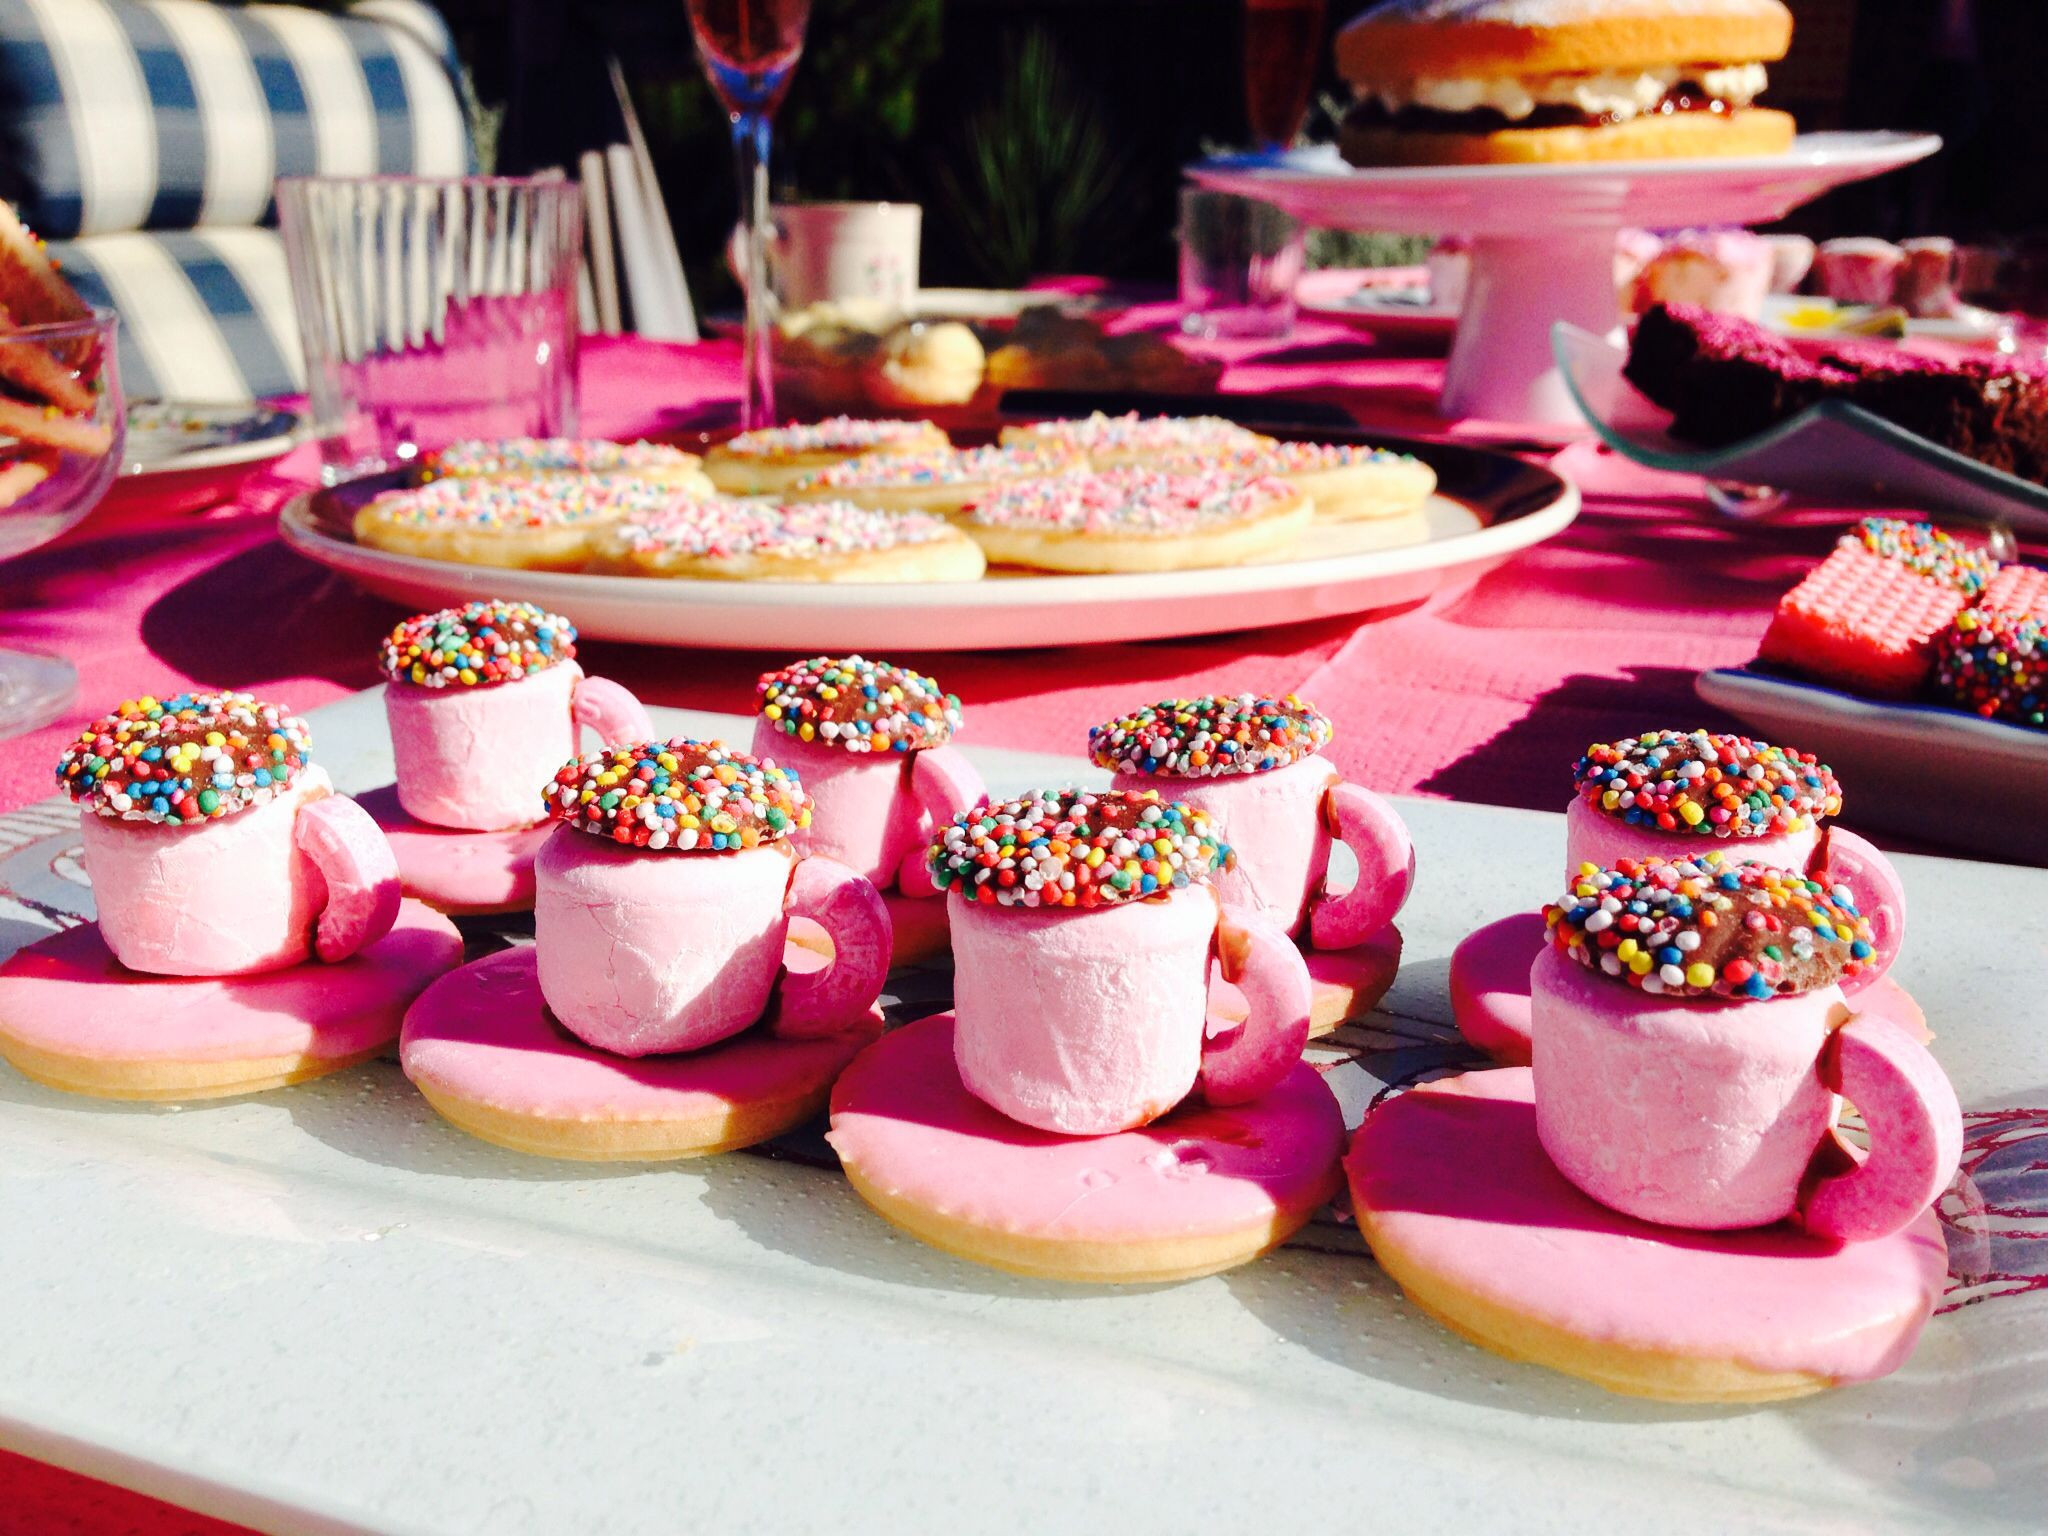 Pink Party Food Ideas
 High tea food ideas pink I know who would love this